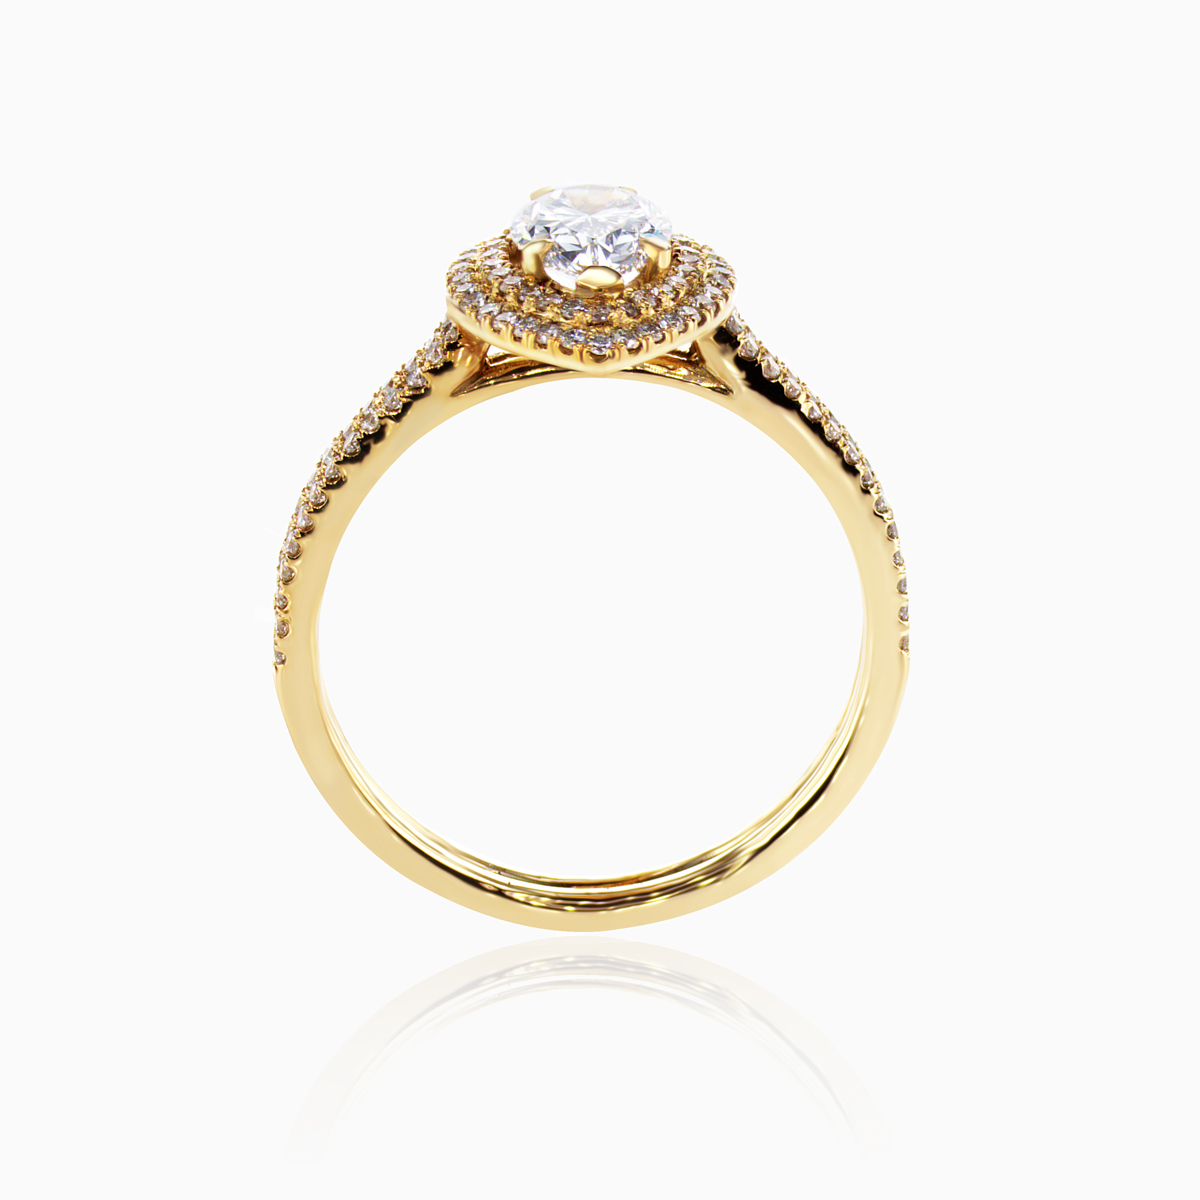 Diamond Double Halo Engagement Ring with 1ct Lab-Grown Pear Diamond,14k Gold